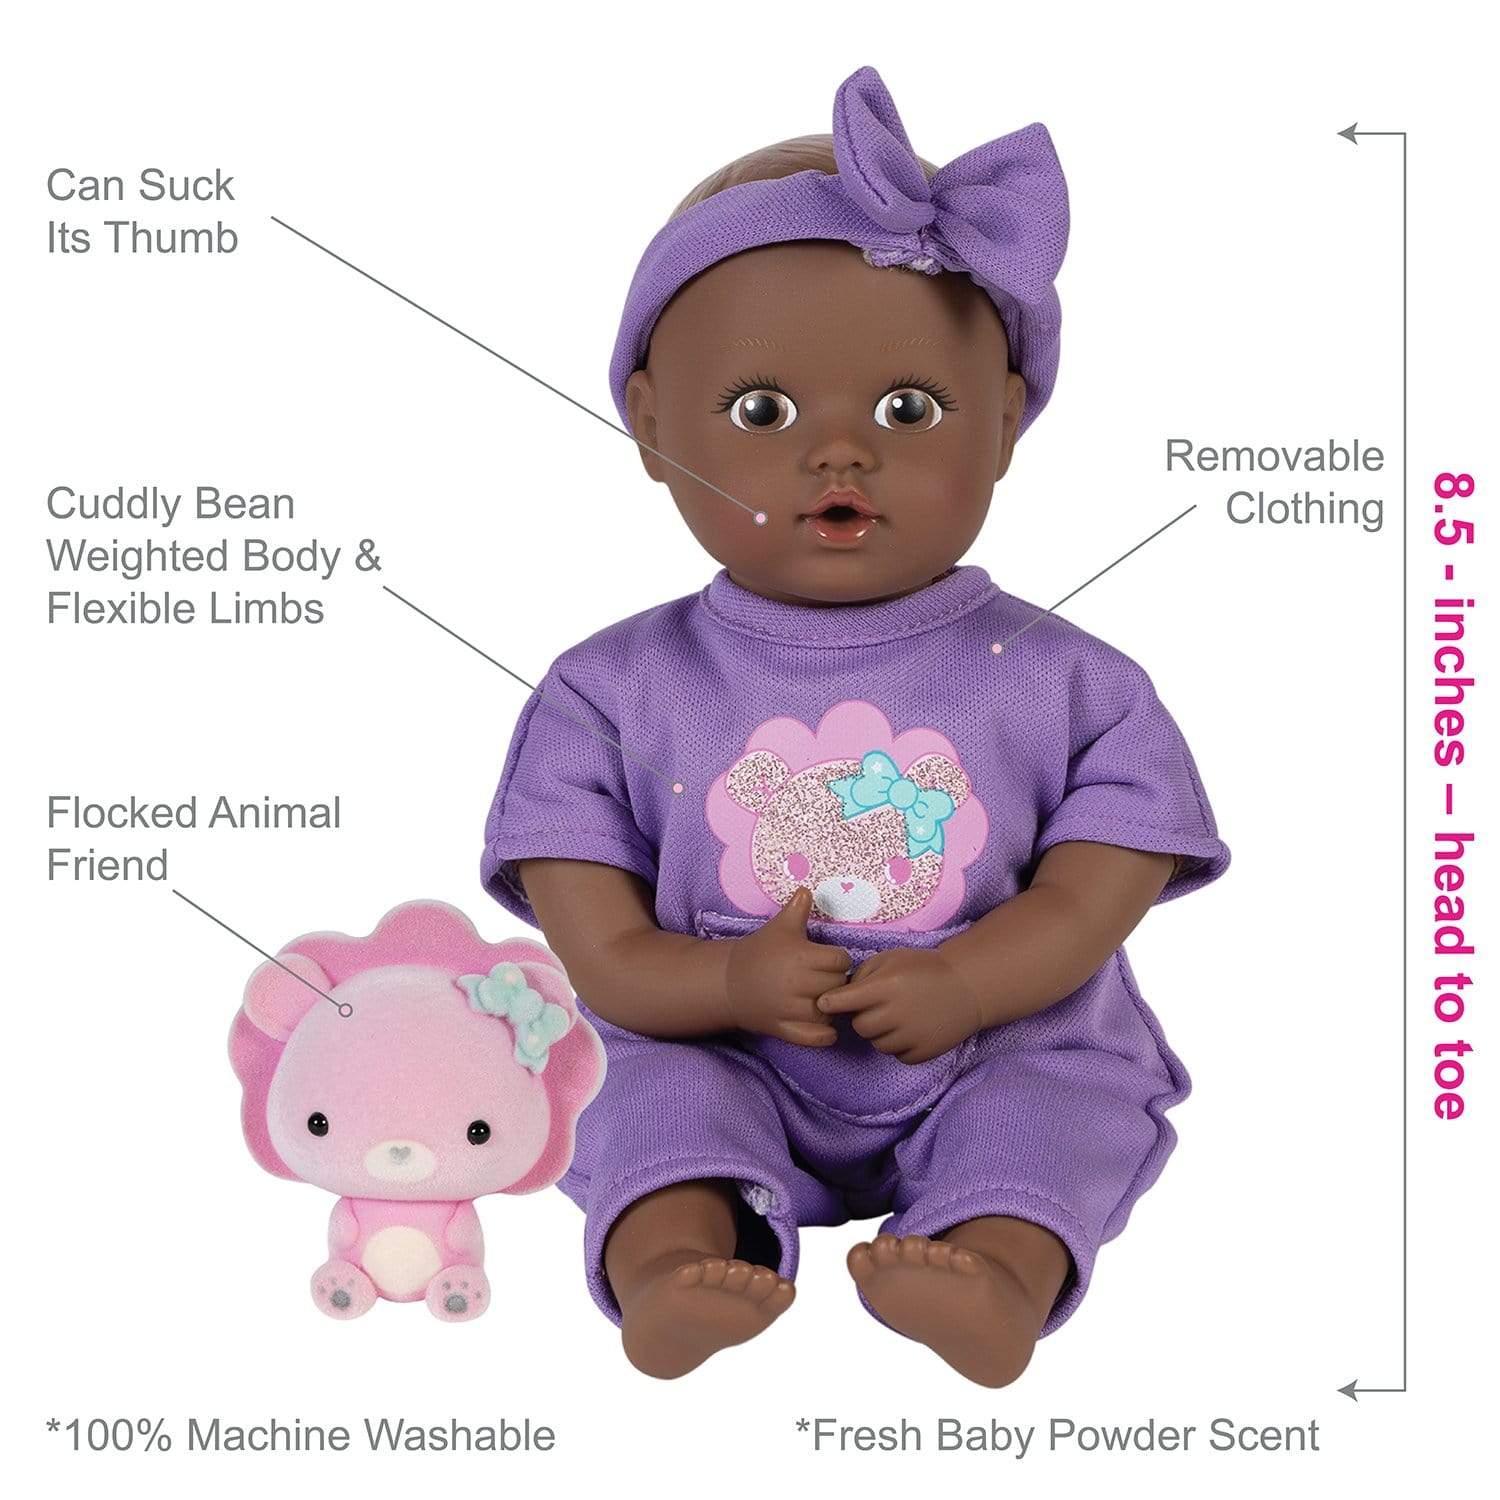 Adora Mini Baby Doll with a Baby Lion Stuffed Animal - Be Bright Tots 